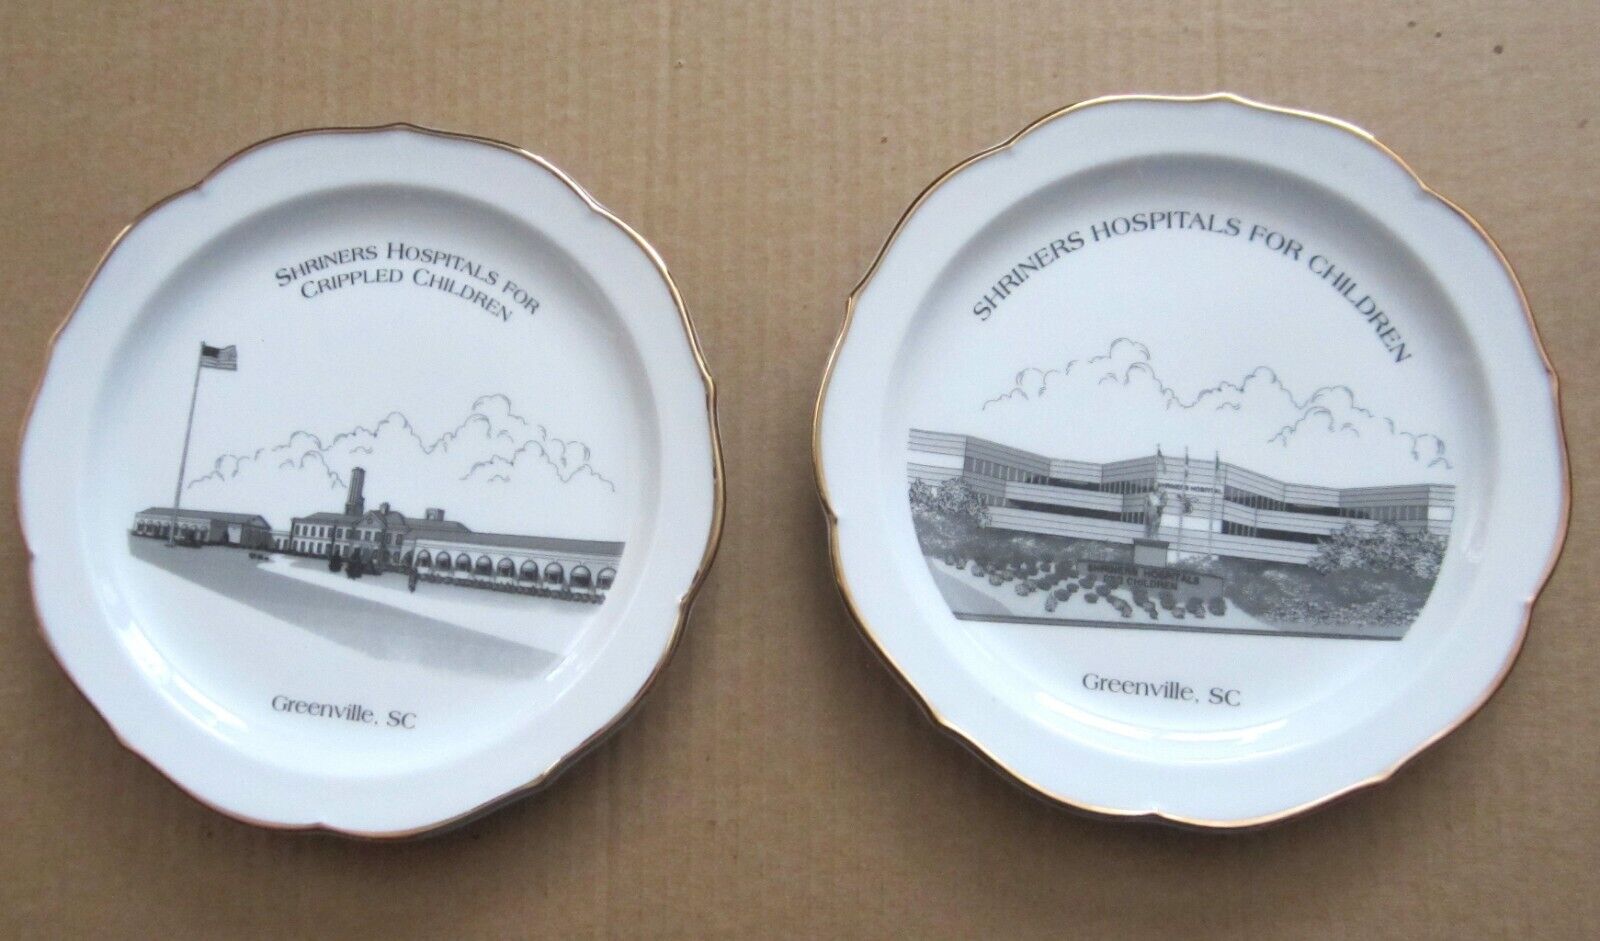 Greenville South Carolina Shriners Hospital The Old and New  Set of 2007 Plates